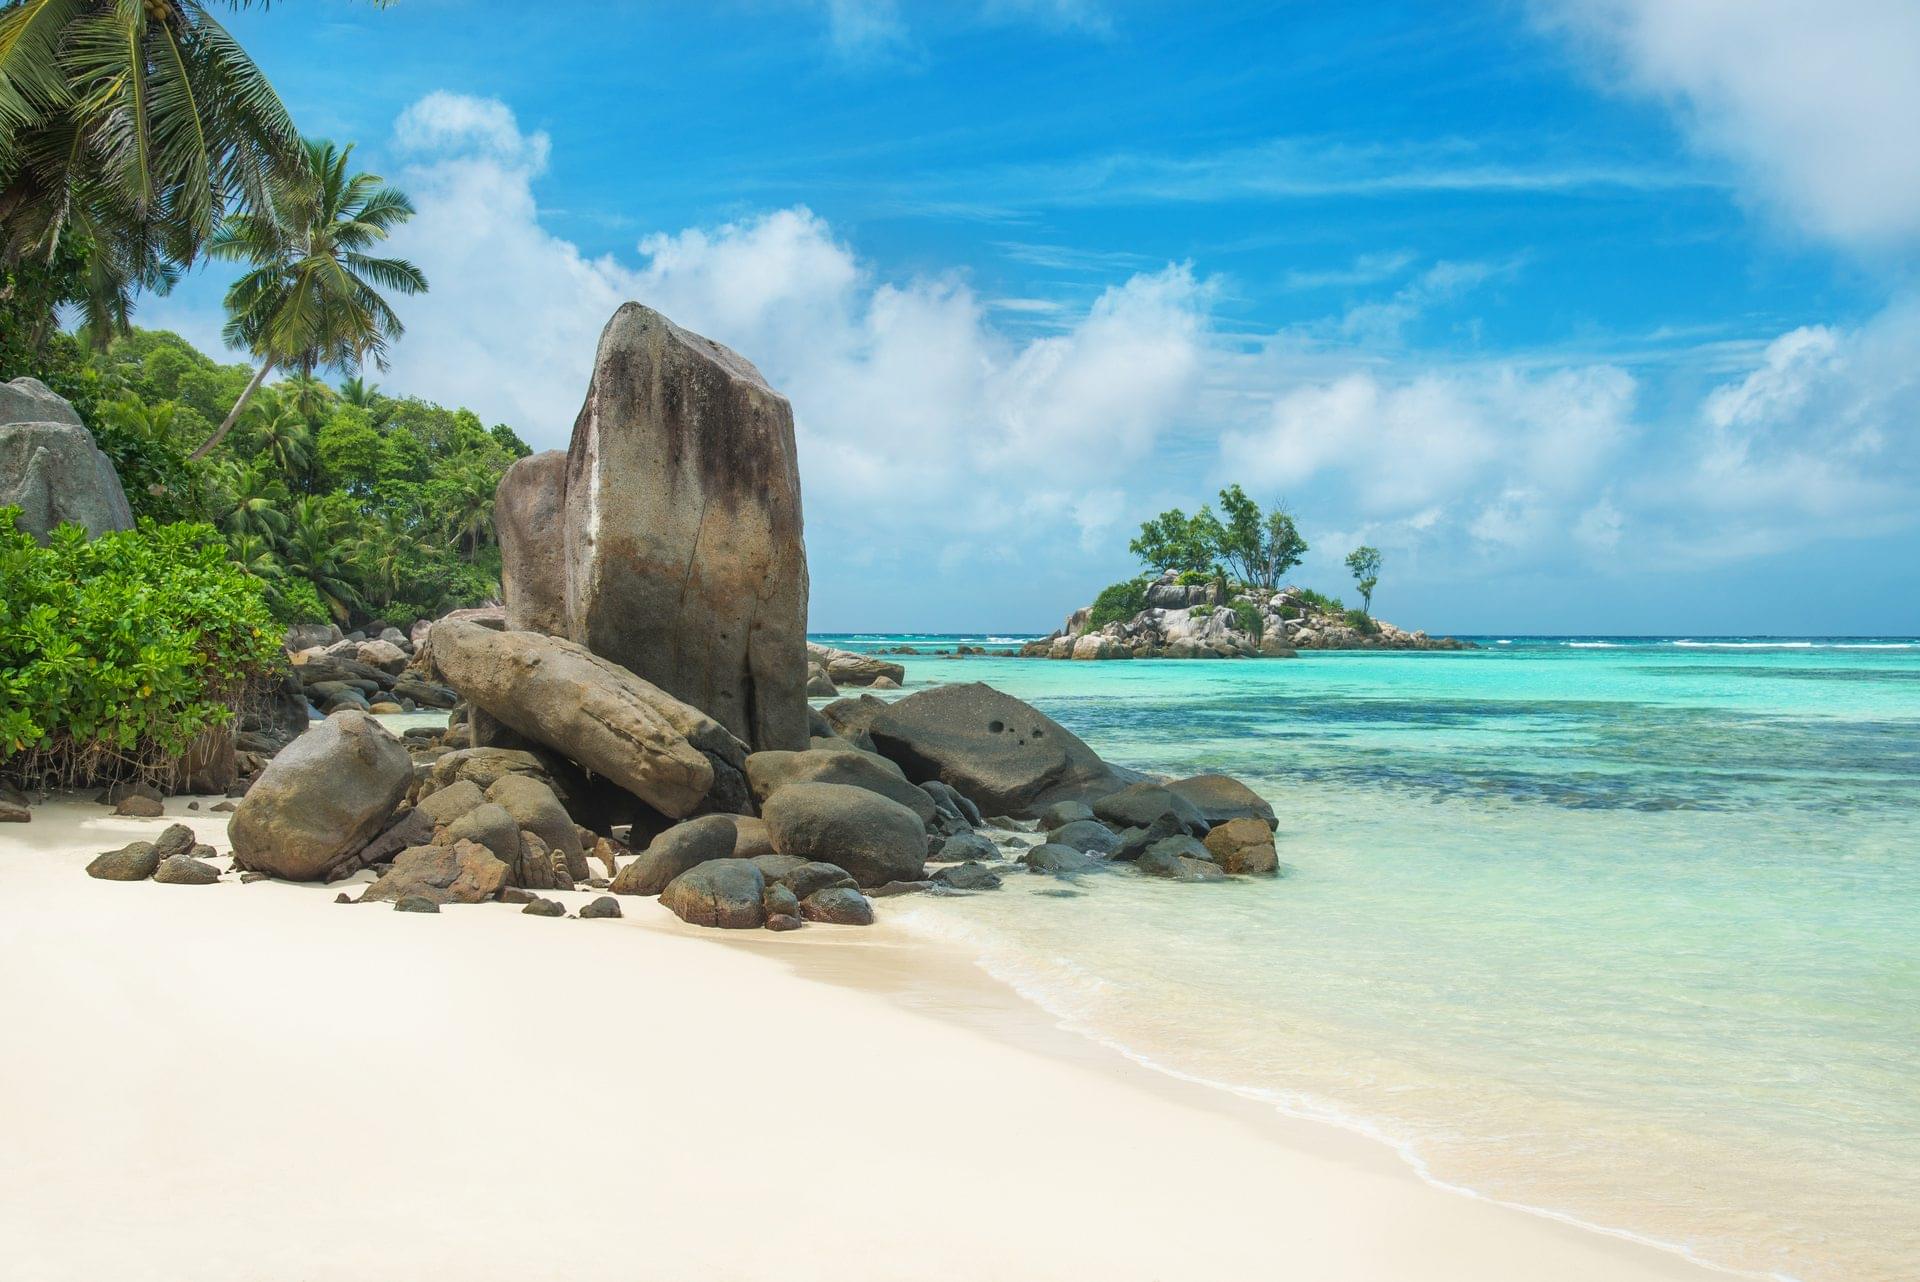 The sandy beaches of the Seychelles.